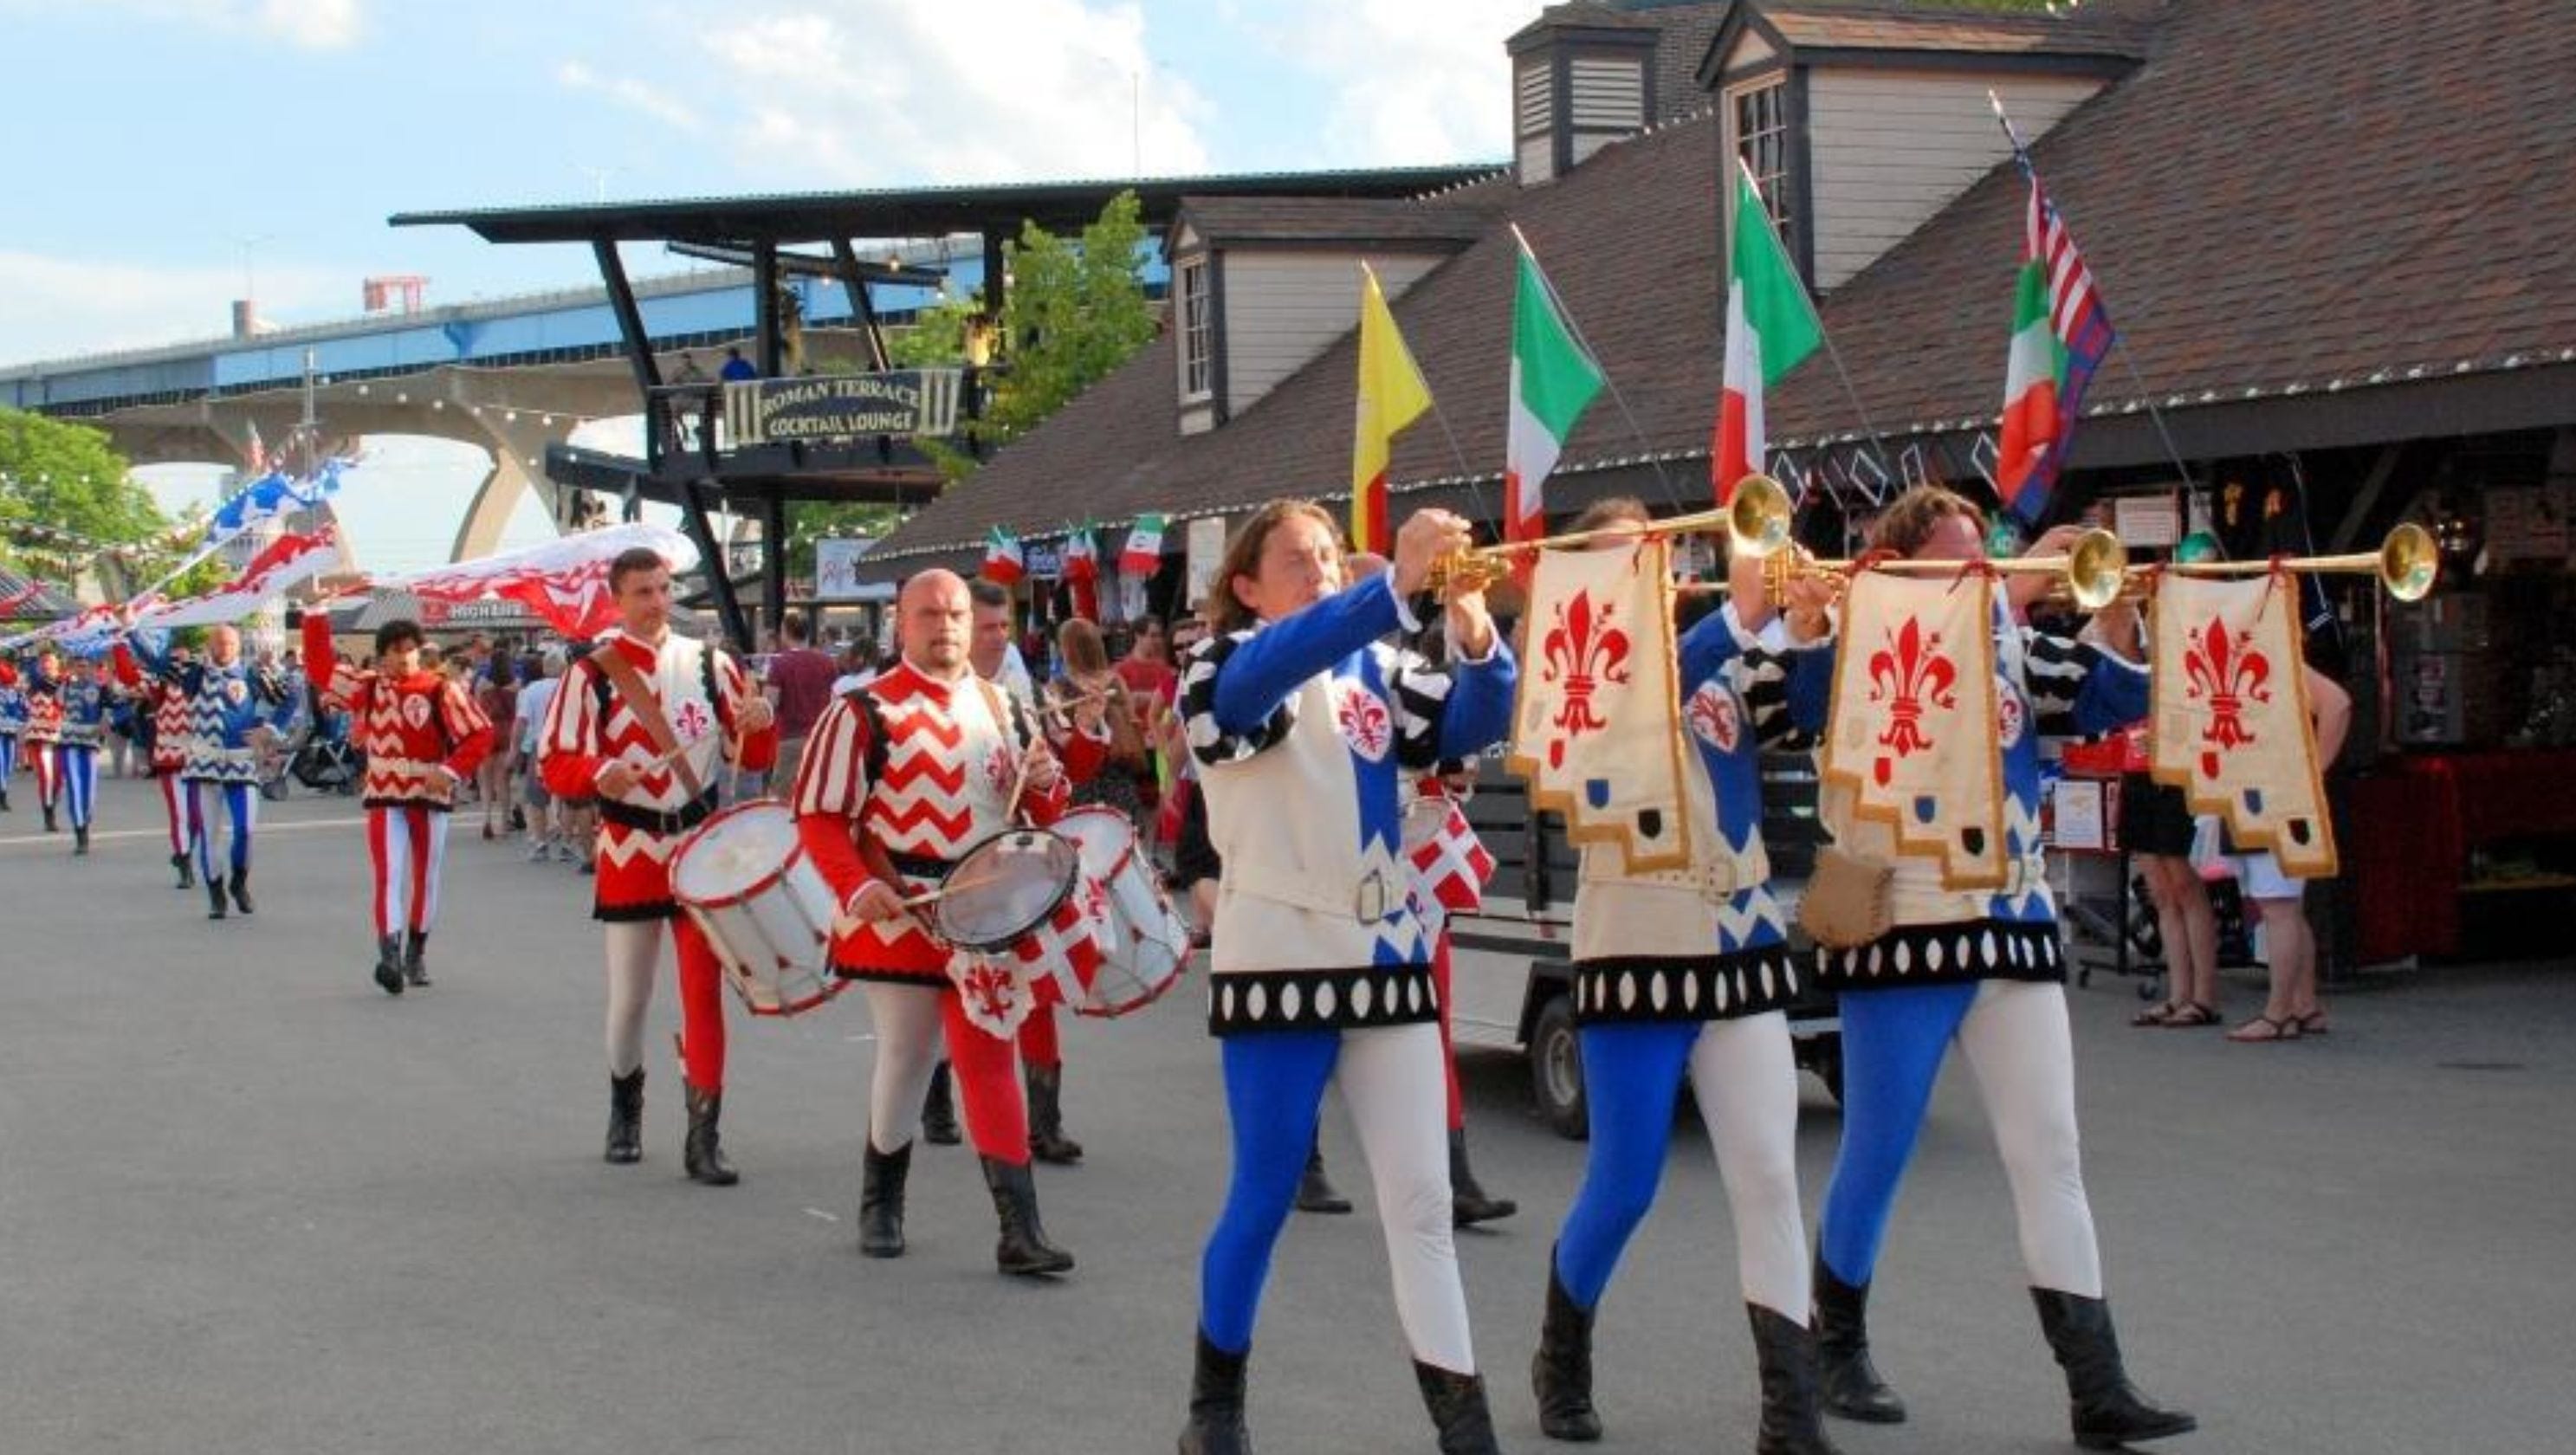 Festa Italiana in Milwaukee canceled for a second year due to COVID19